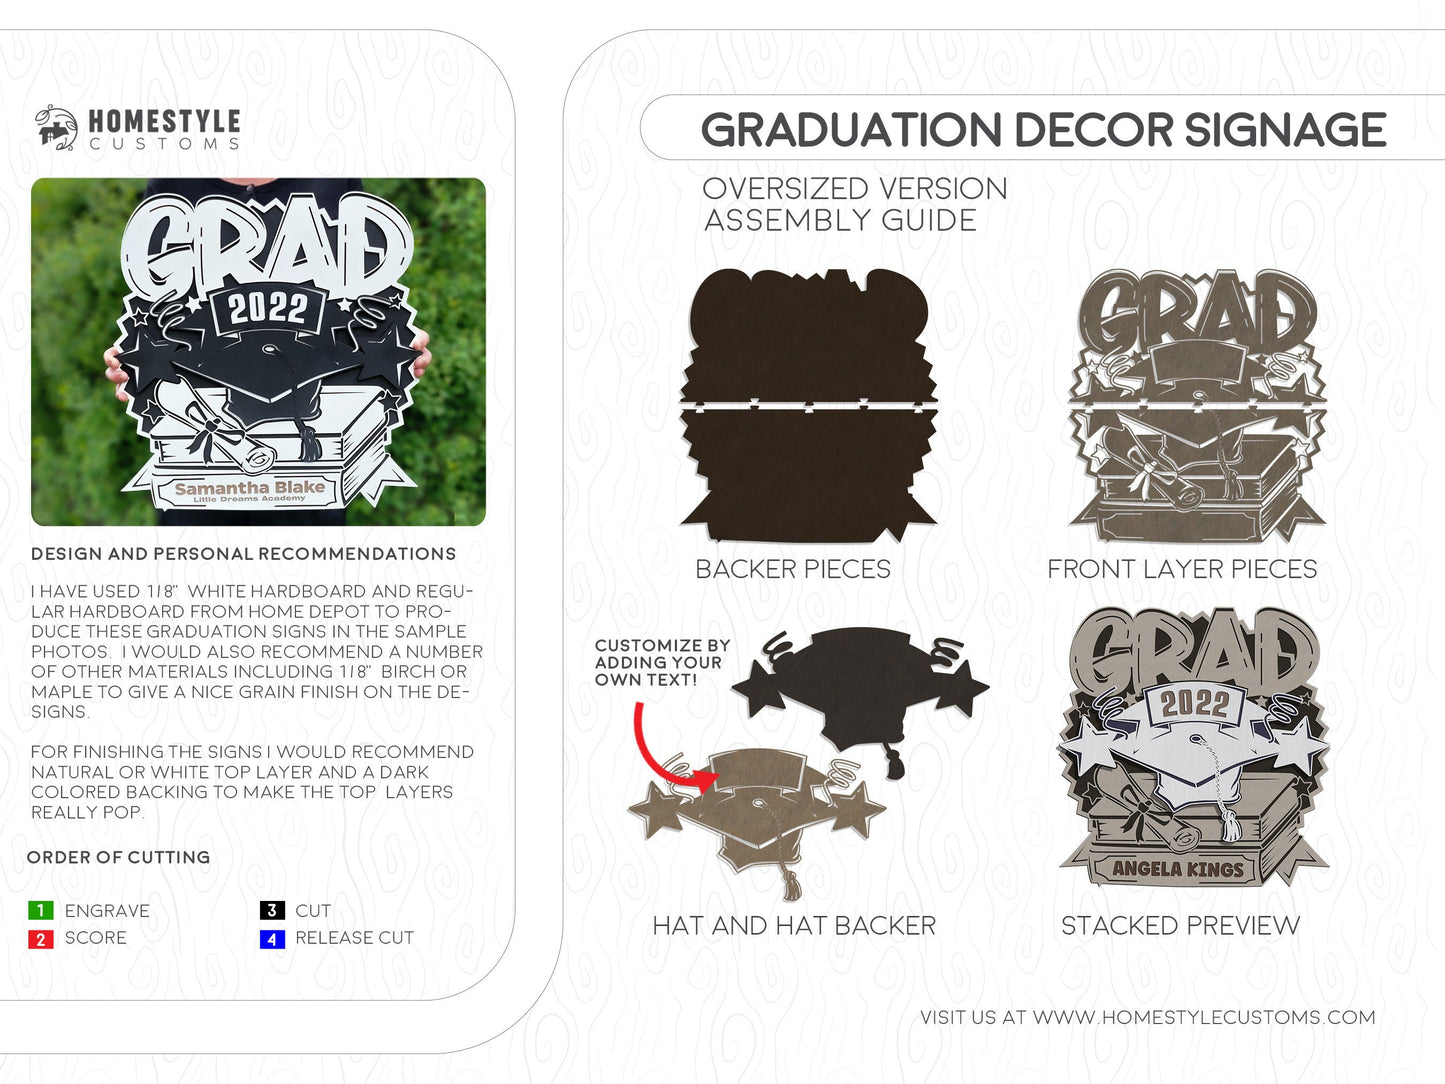 Graduation Decor Signage - Regular and Oversized Version included for Smaller Lasers - SVG File Download - Sized & Tested in Glowforge